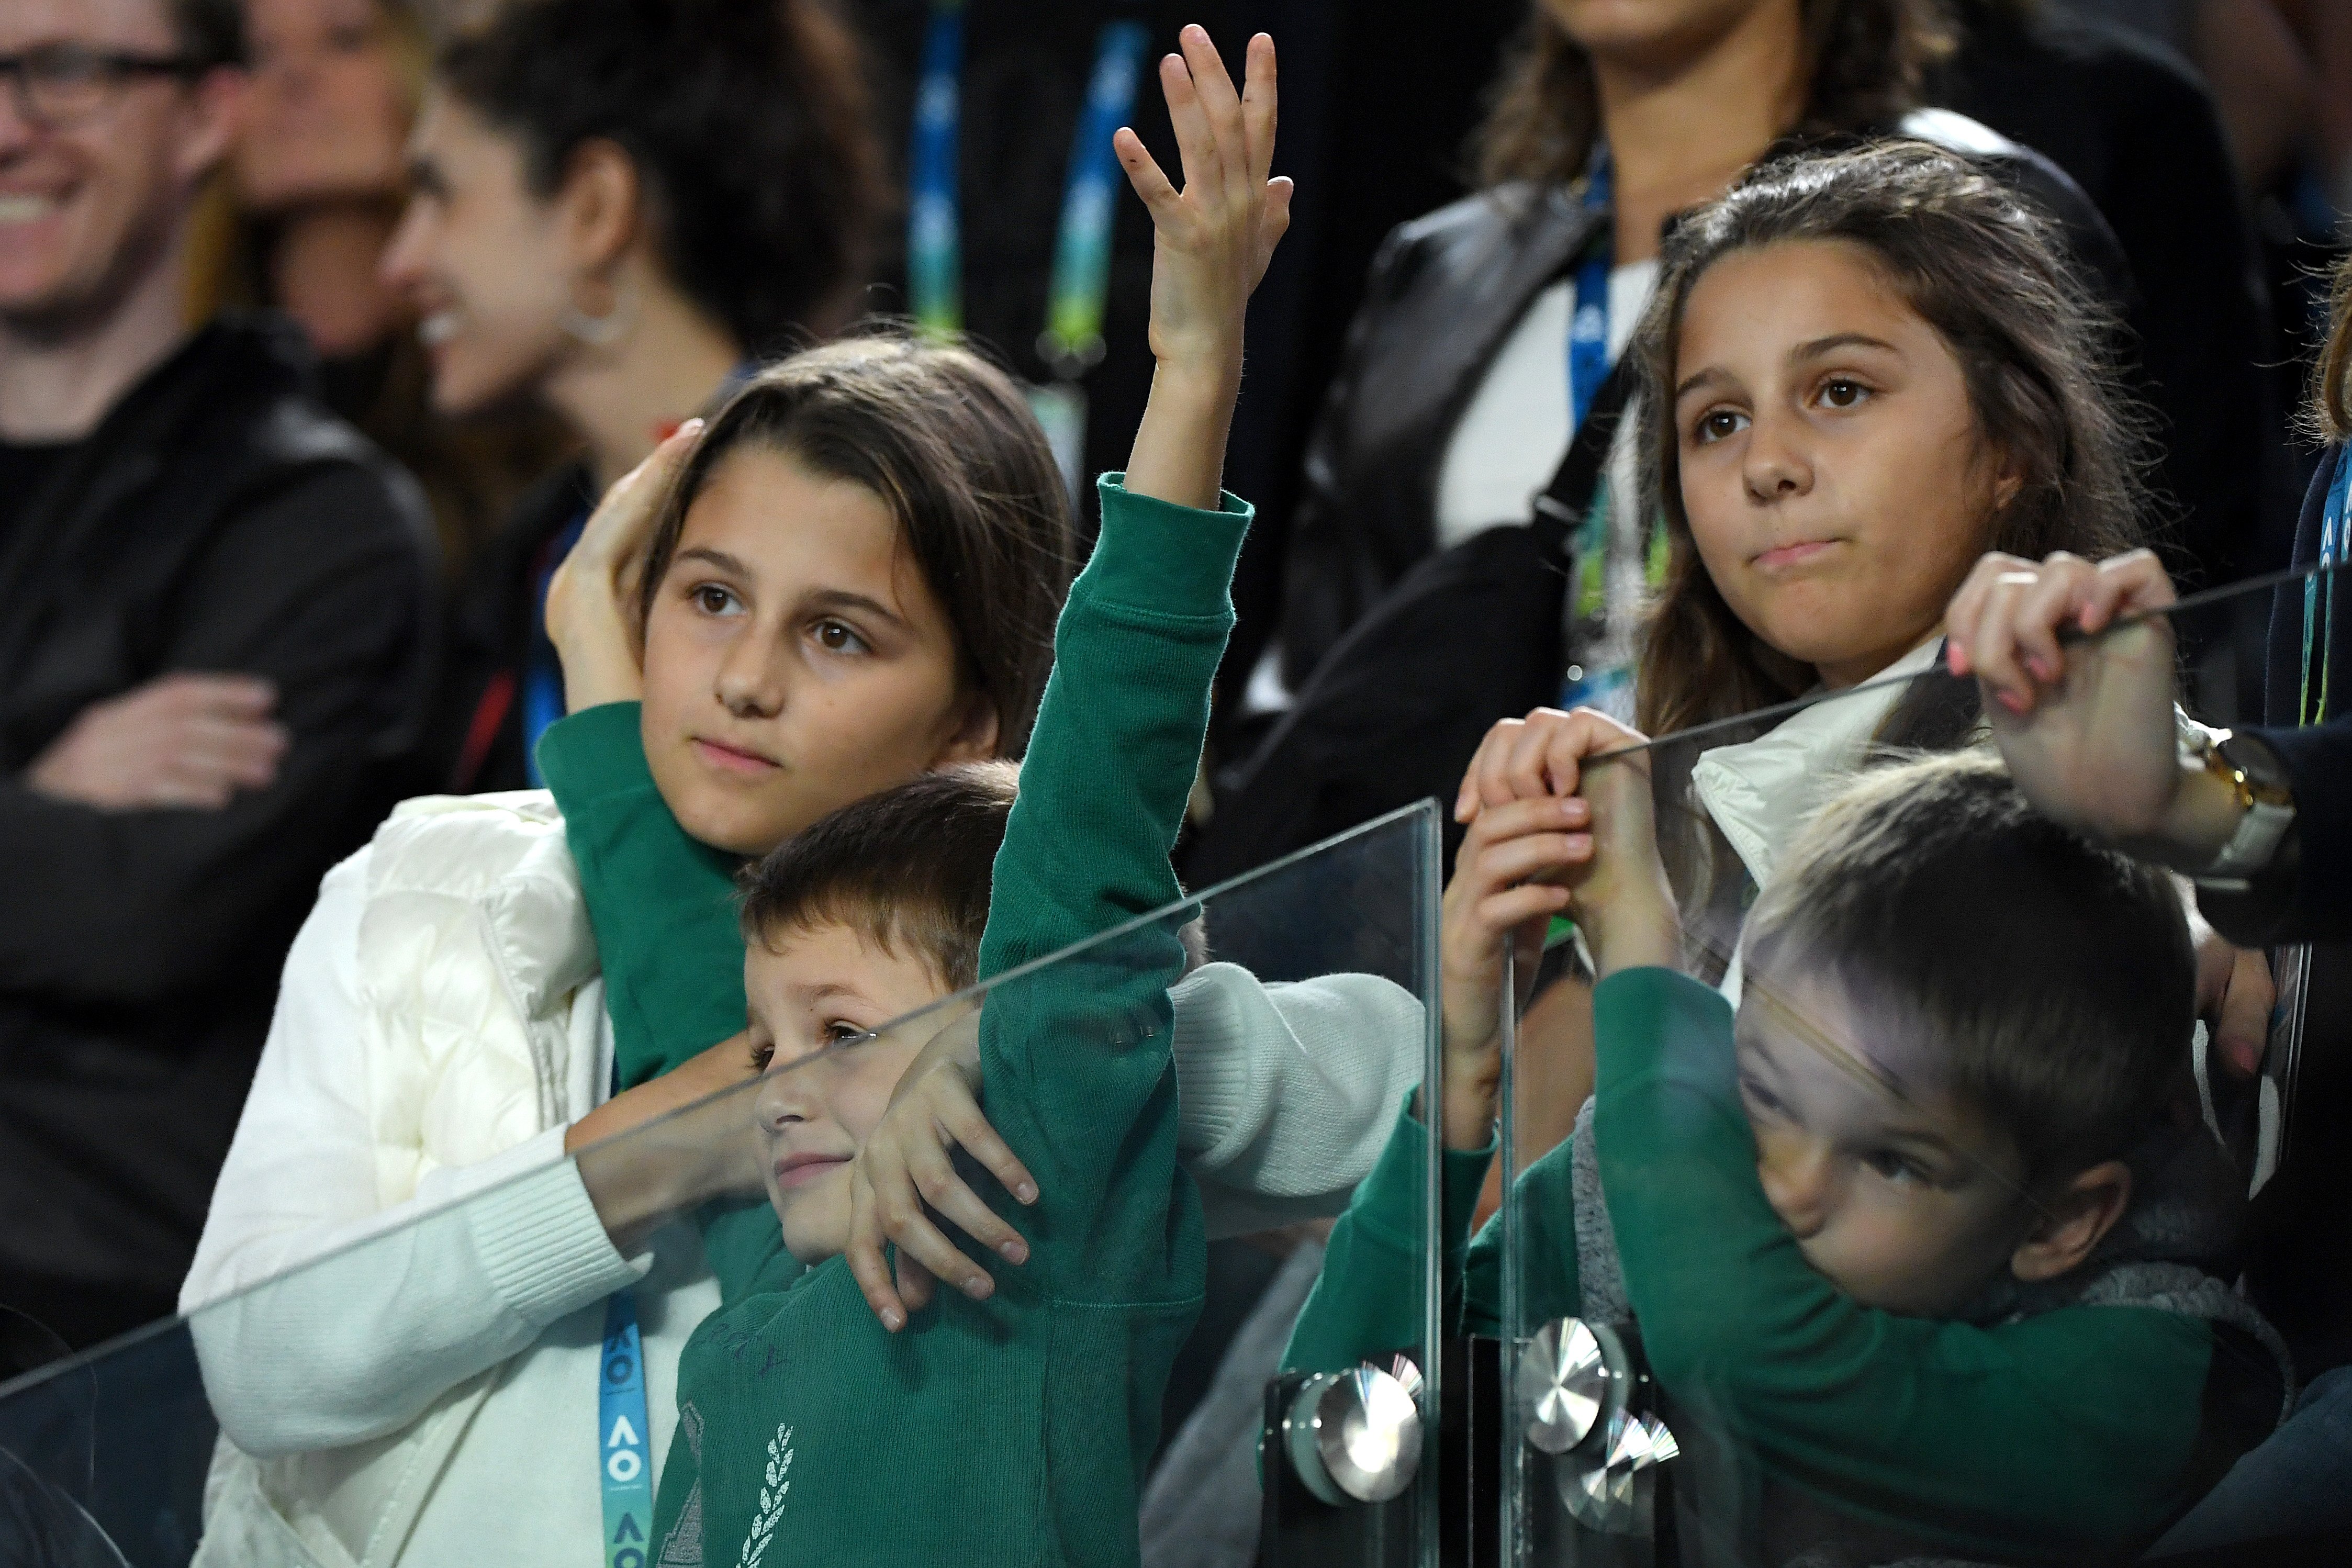 Charlene Riva, Myla Rose, Lenny, and Leo Federer at their father Roger Federer's match against Steve Johnson of the United States of America at the 2020 Australian Open on January 20, 2020, in Melbourne, Australia. | Source: Getty Images